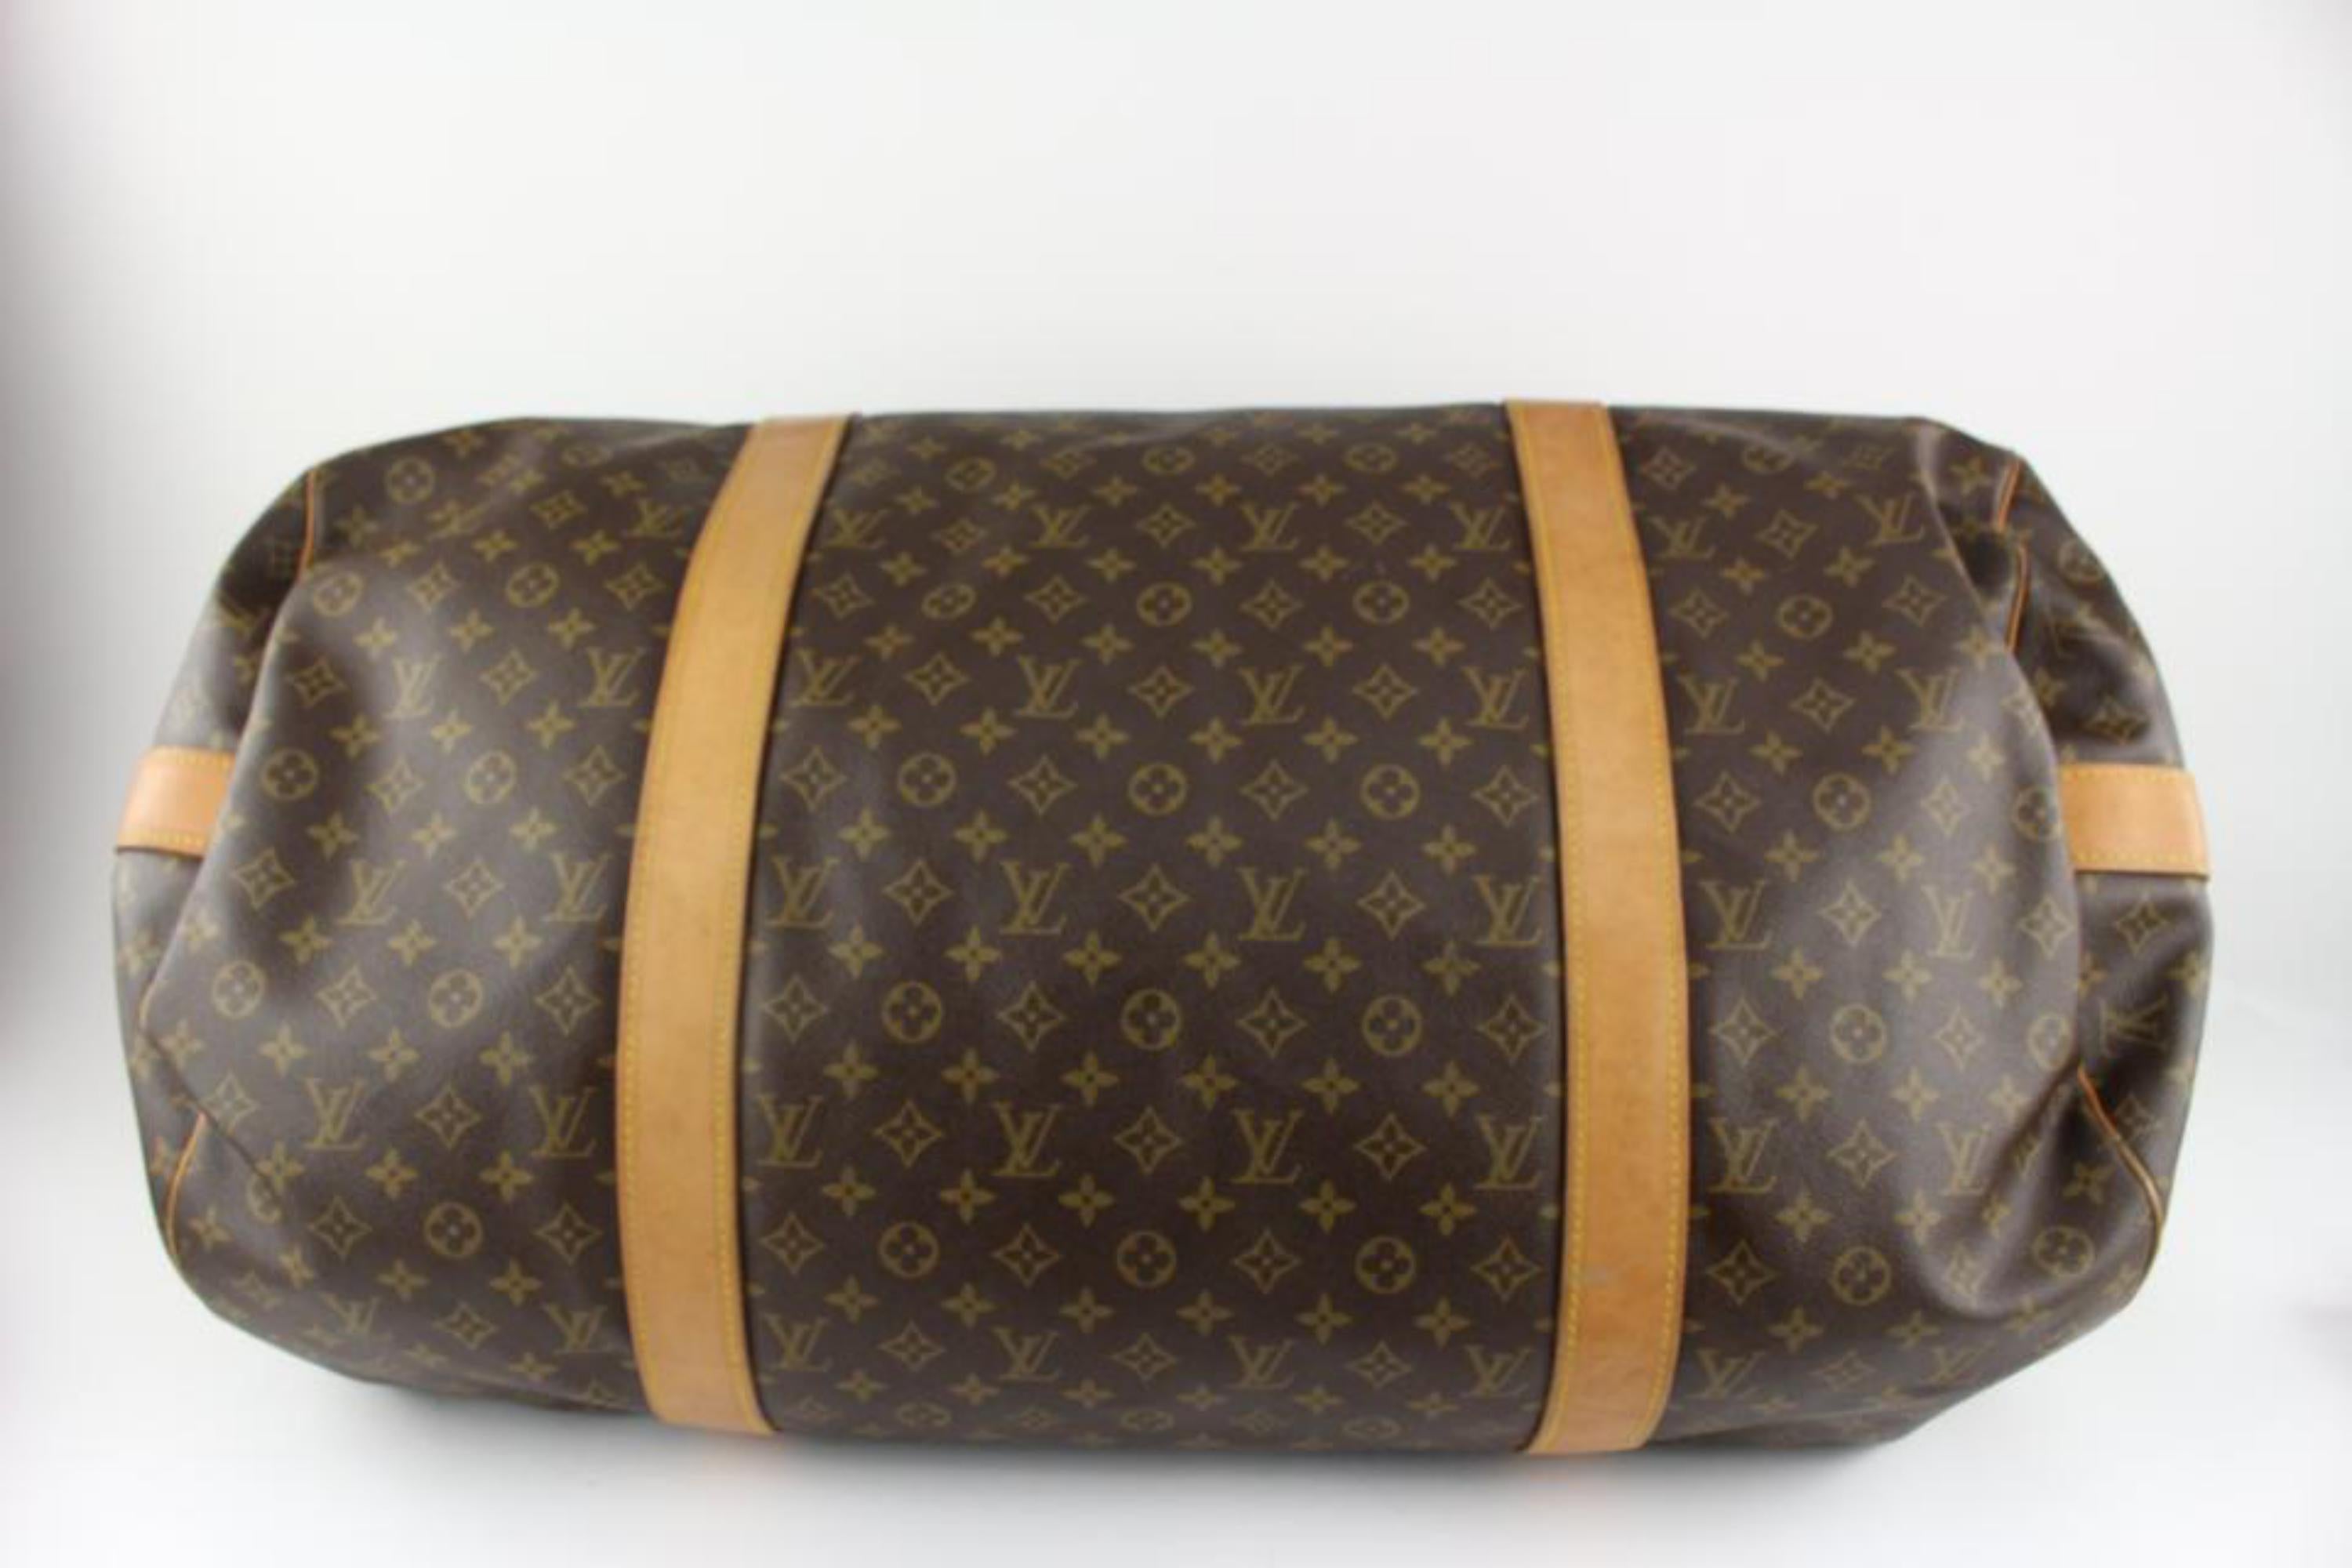 Louis Vuitton XL Monogram Sac Polochon 70 Bandouliere Keepall 16LV1104 In Good Condition For Sale In Dix hills, NY